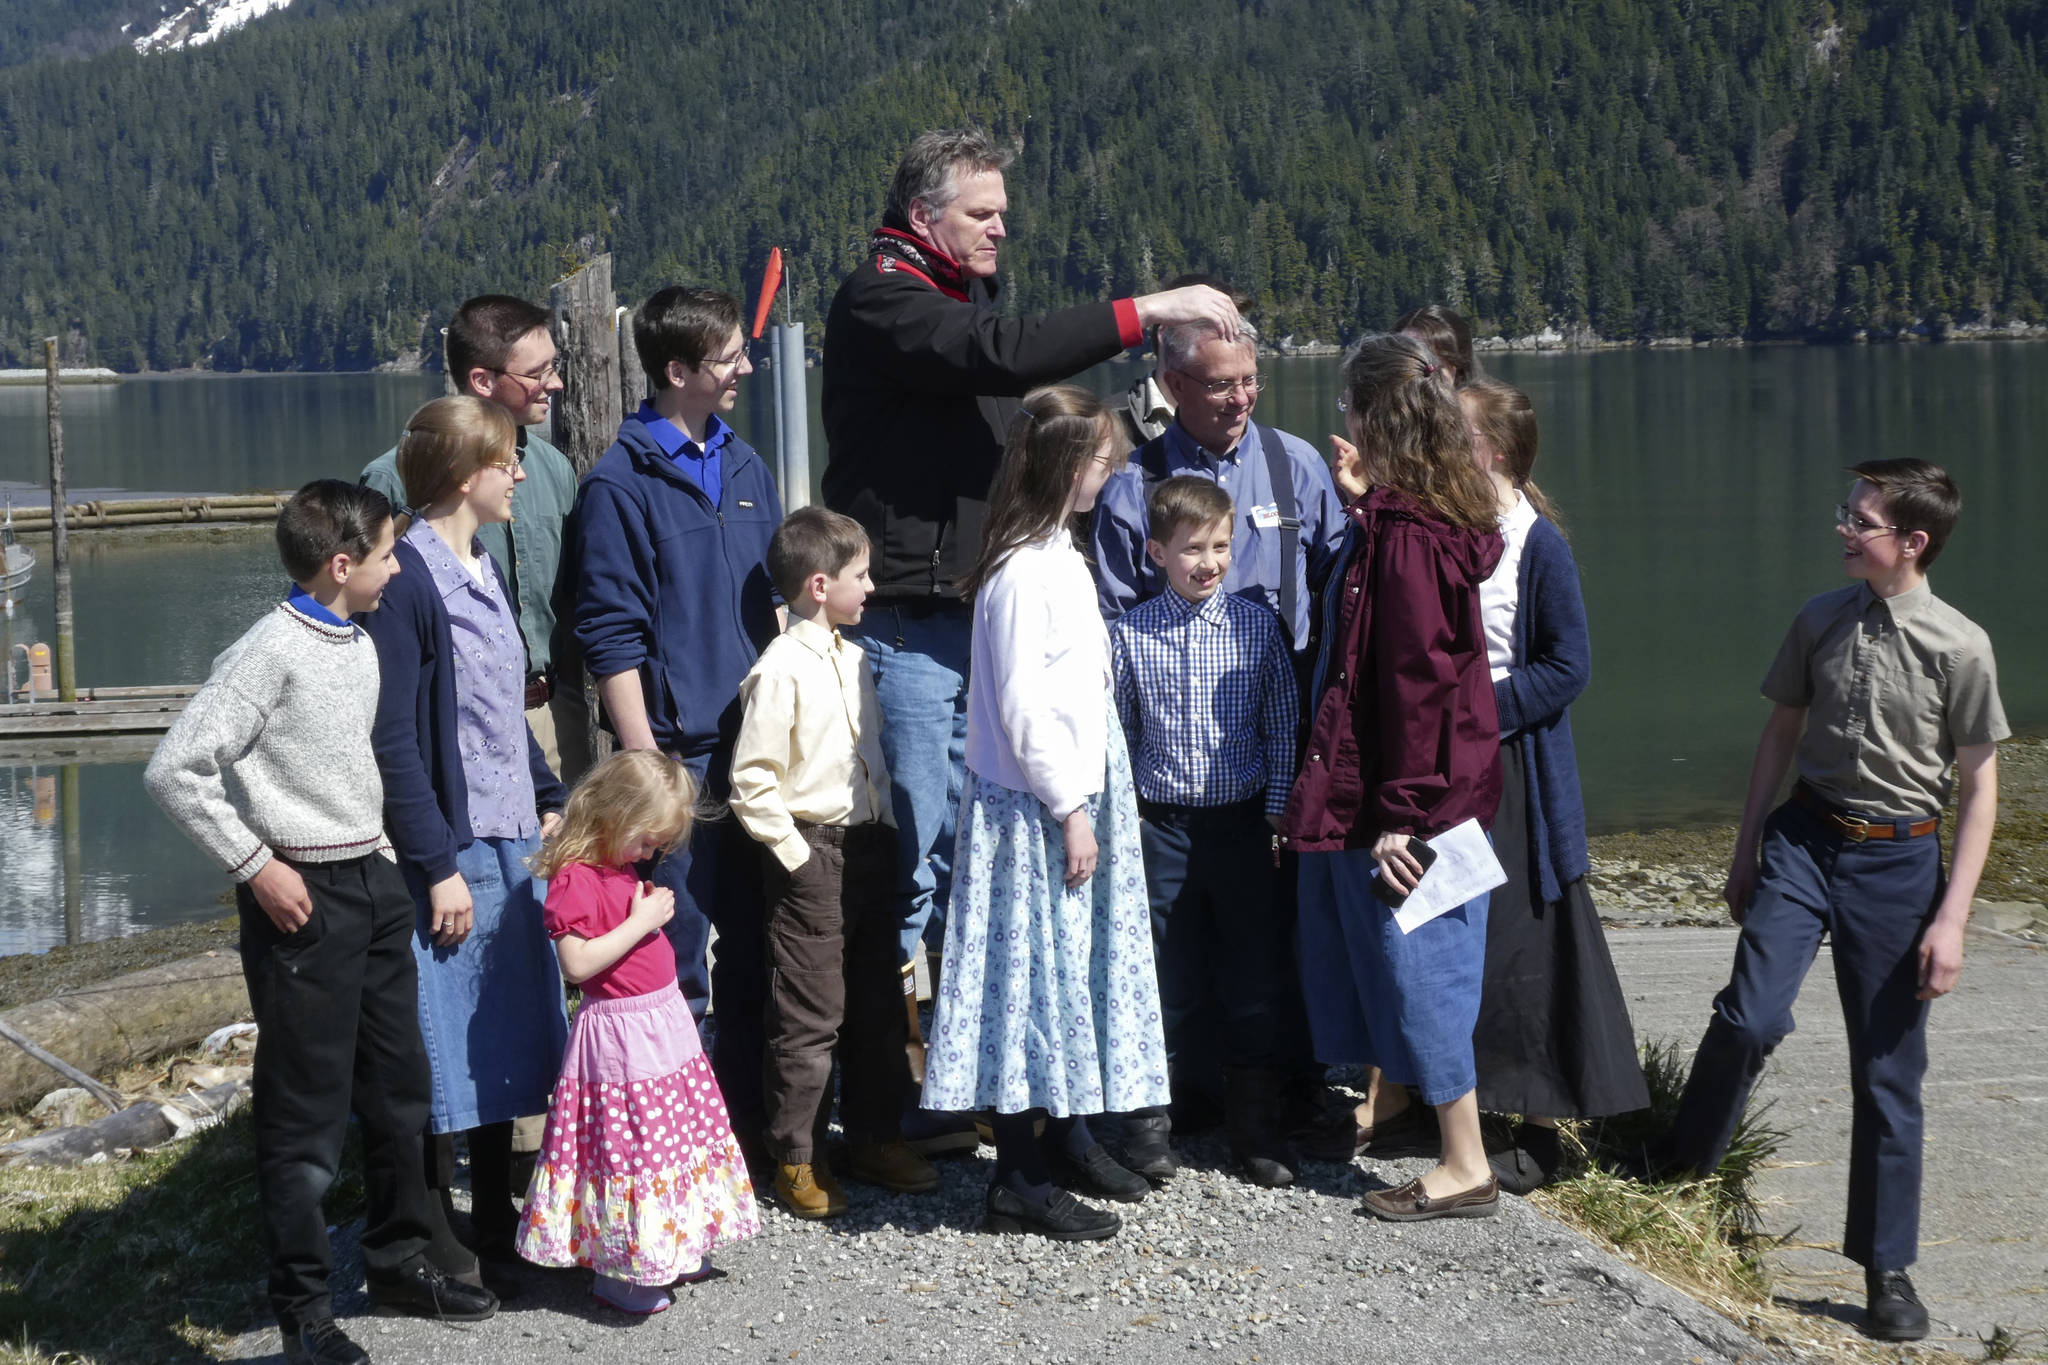 Alaska Gov. Mike Dunleavy, center, gathers with members of Mark and Amy Bach’s family as they prepare to pose for a photo on Thursday, April 22, 2021, in Hyder, Alaska. The family also invited Dunleavy to their home before he left Hyder, a small community near the U.S.-Canada border and one of the stops on Dunleavy’s one-day visit to southeast Alaska communities on April 22, 2021. (AP Photo/Becky Bohrer)